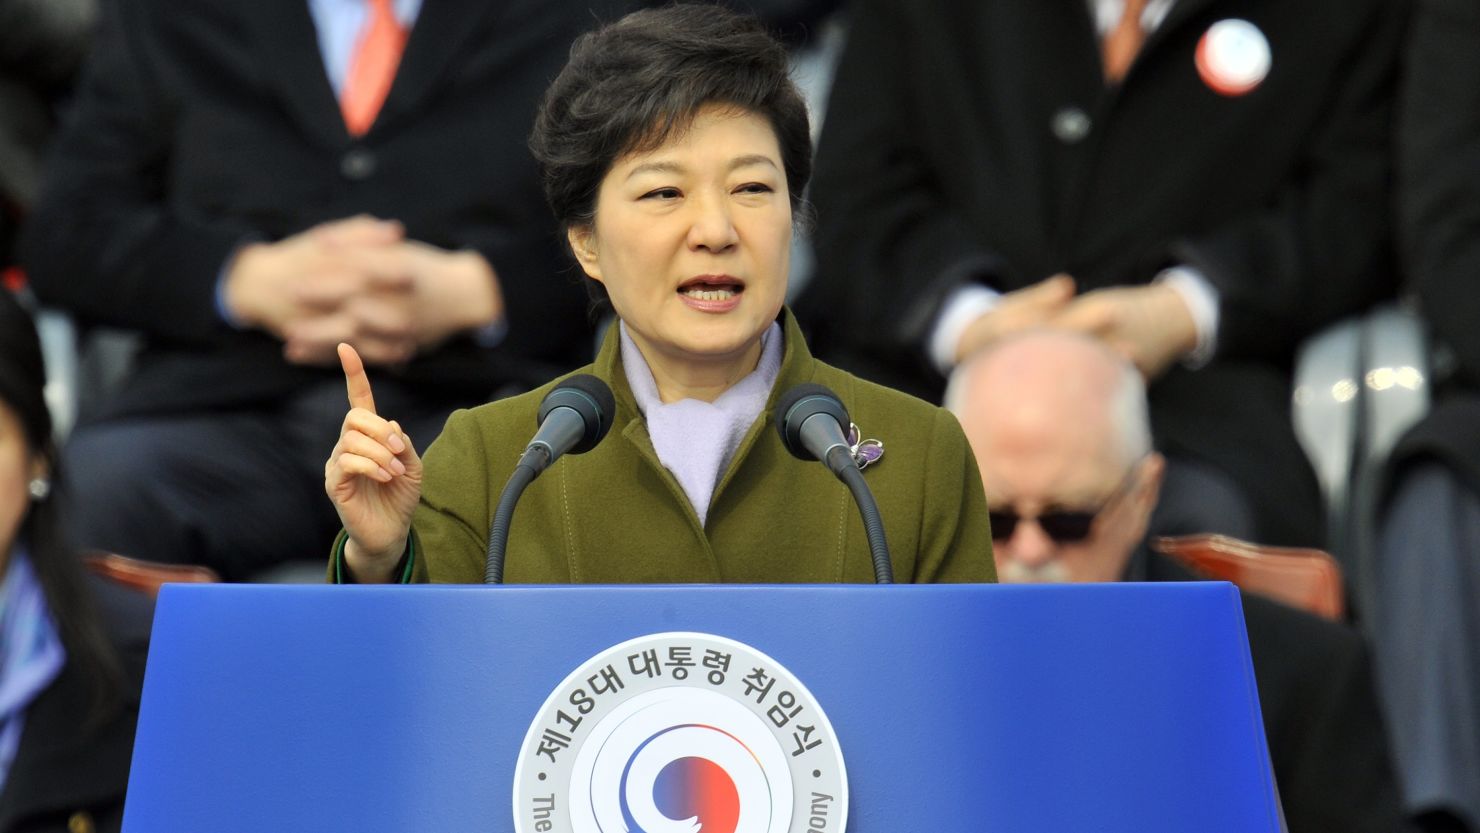 South Korean President Park Geun-hye says the future of the Korean peninsula relies on U.S. involvement in the peace process.